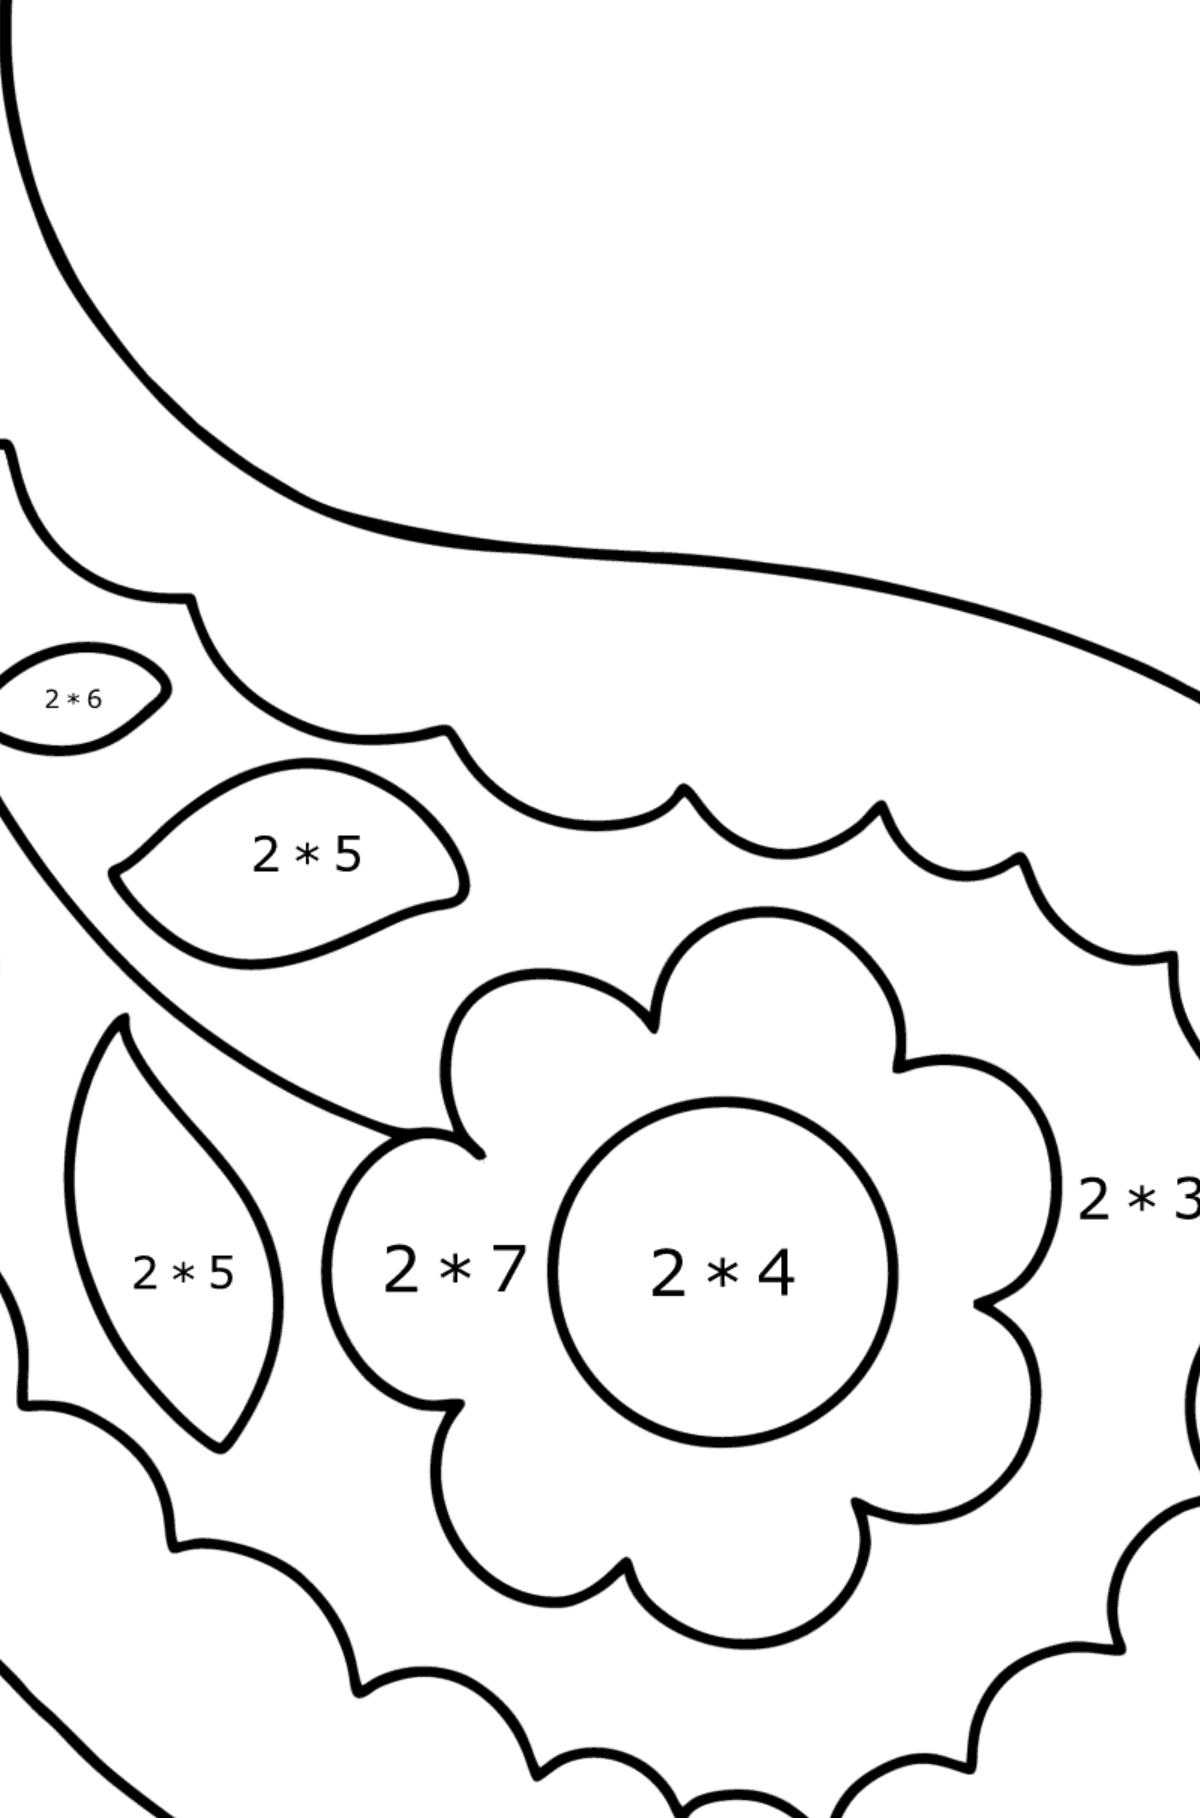 Paisley coloring page for baby - Math Coloring - Multiplication for Kids